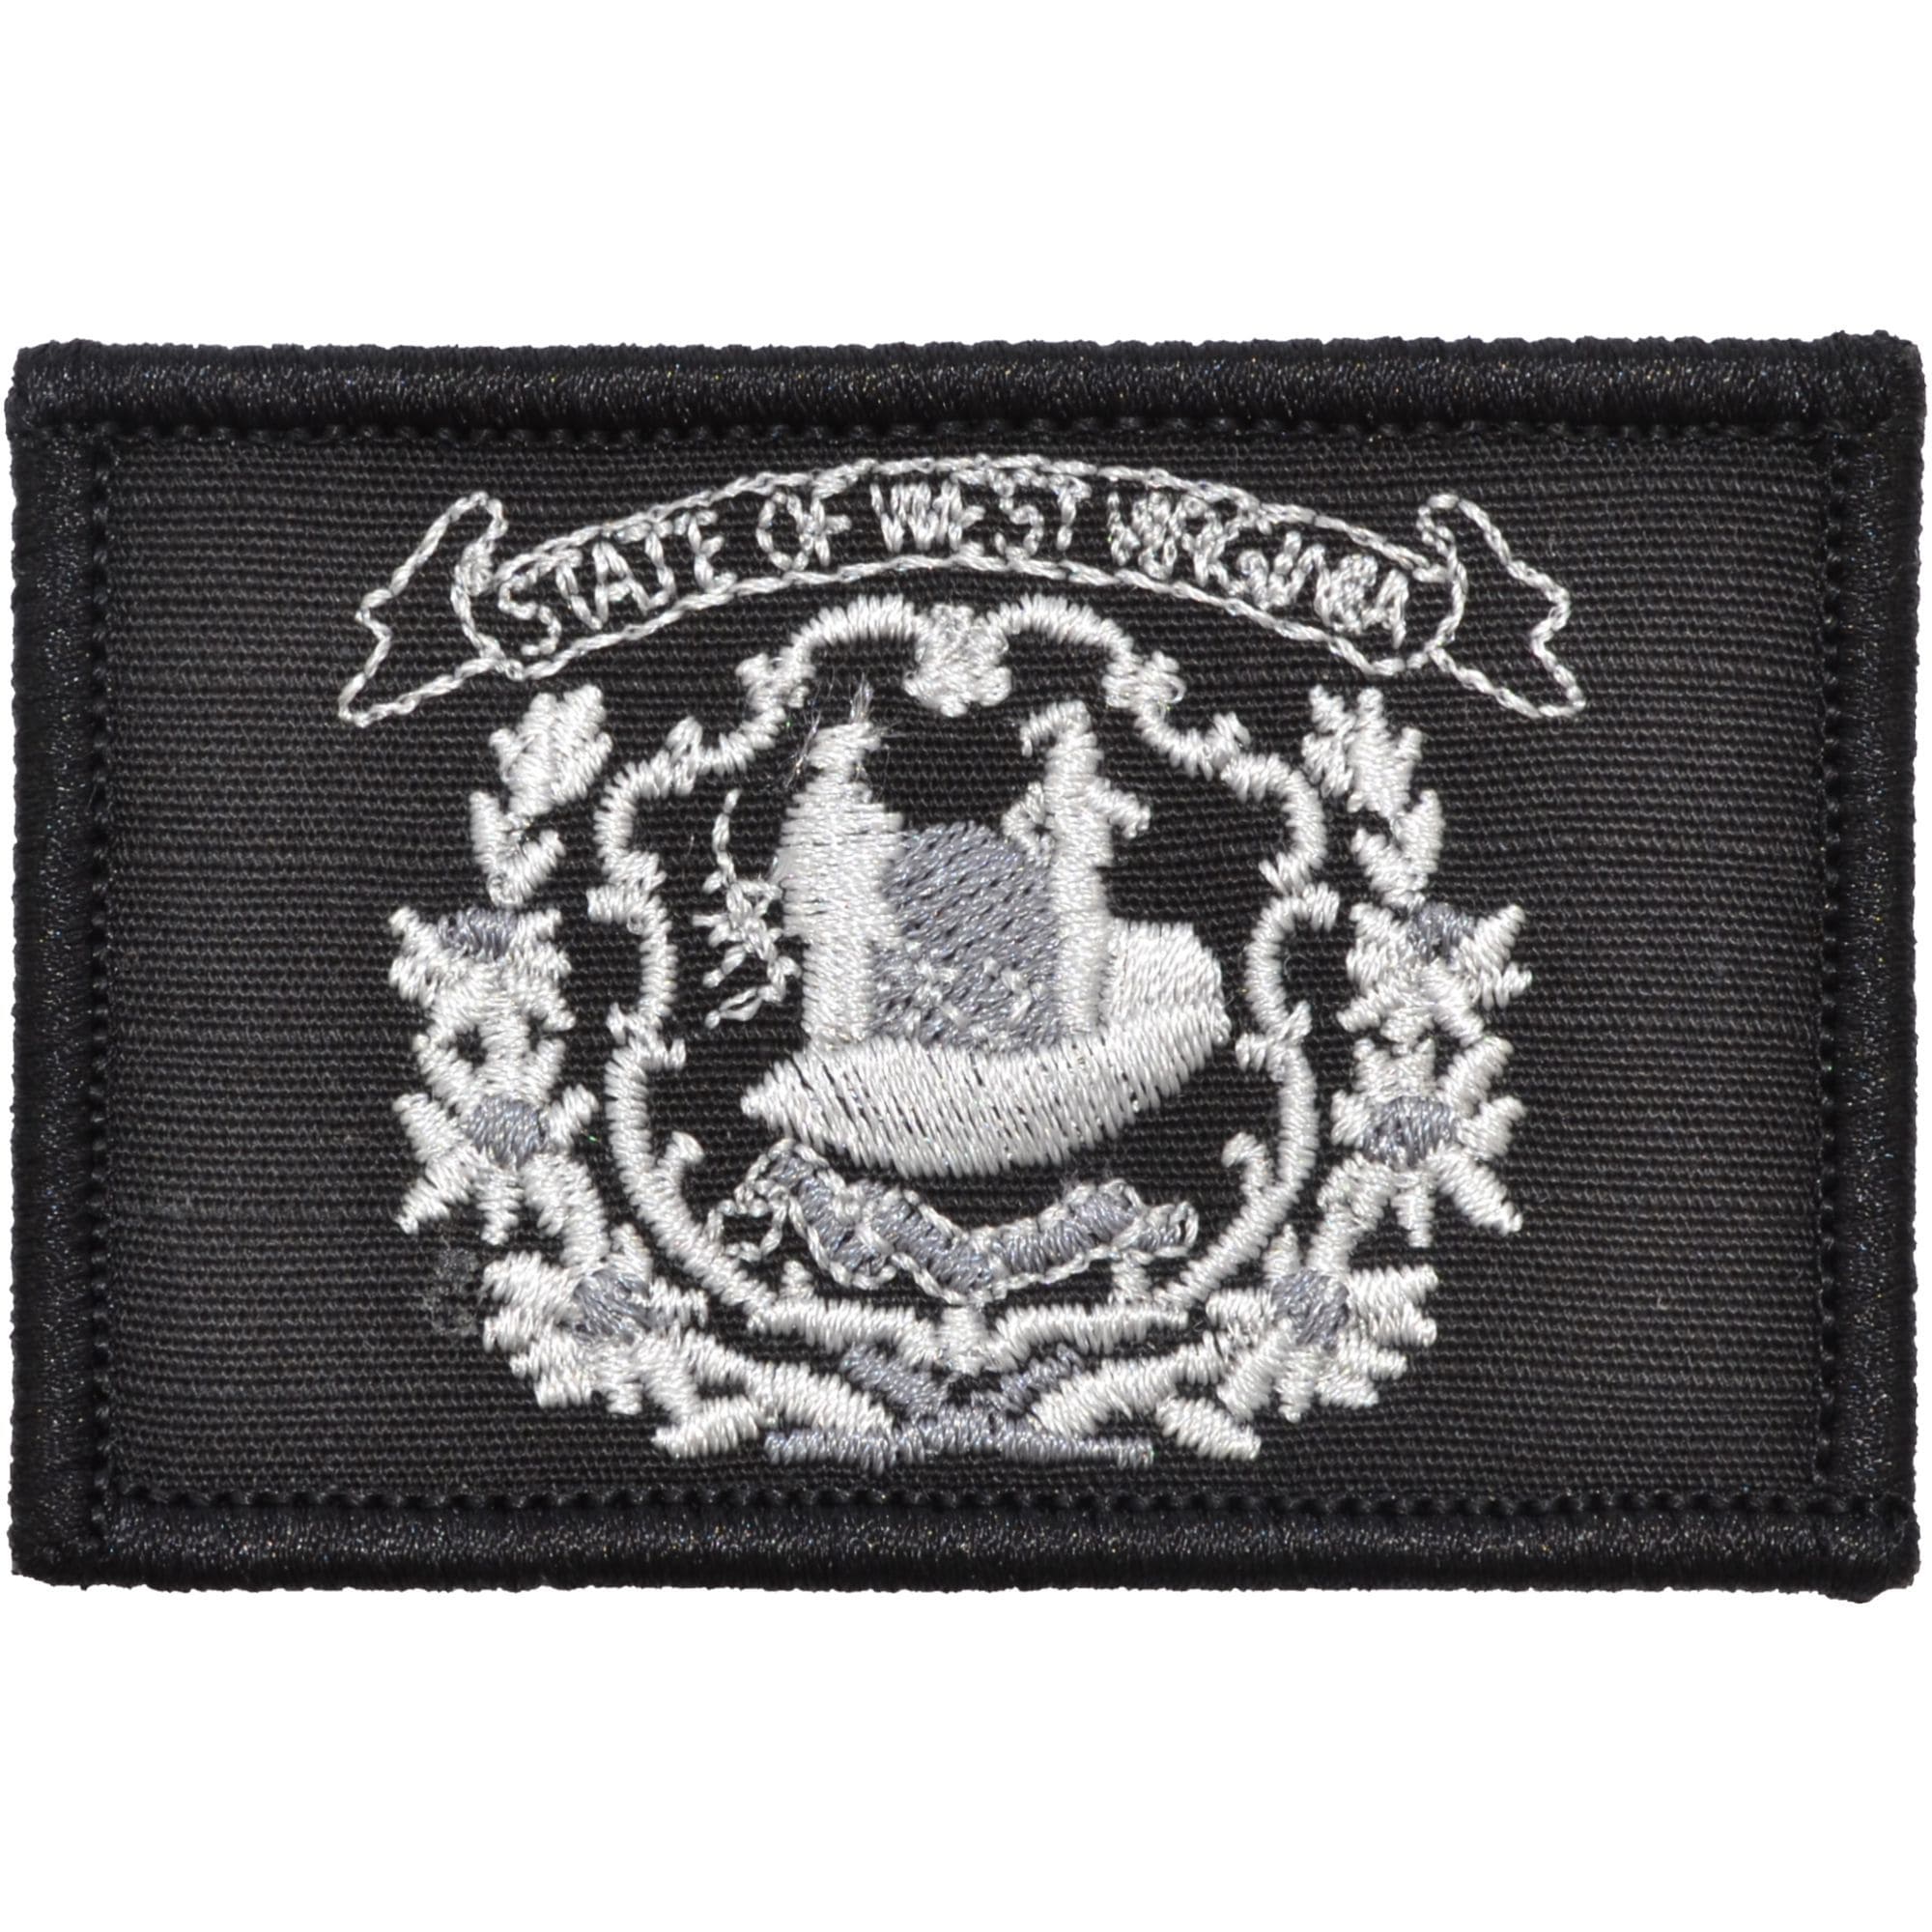 Tactical Gear Junkie Patches Black West Virginia State Flag - 2x3 Patch